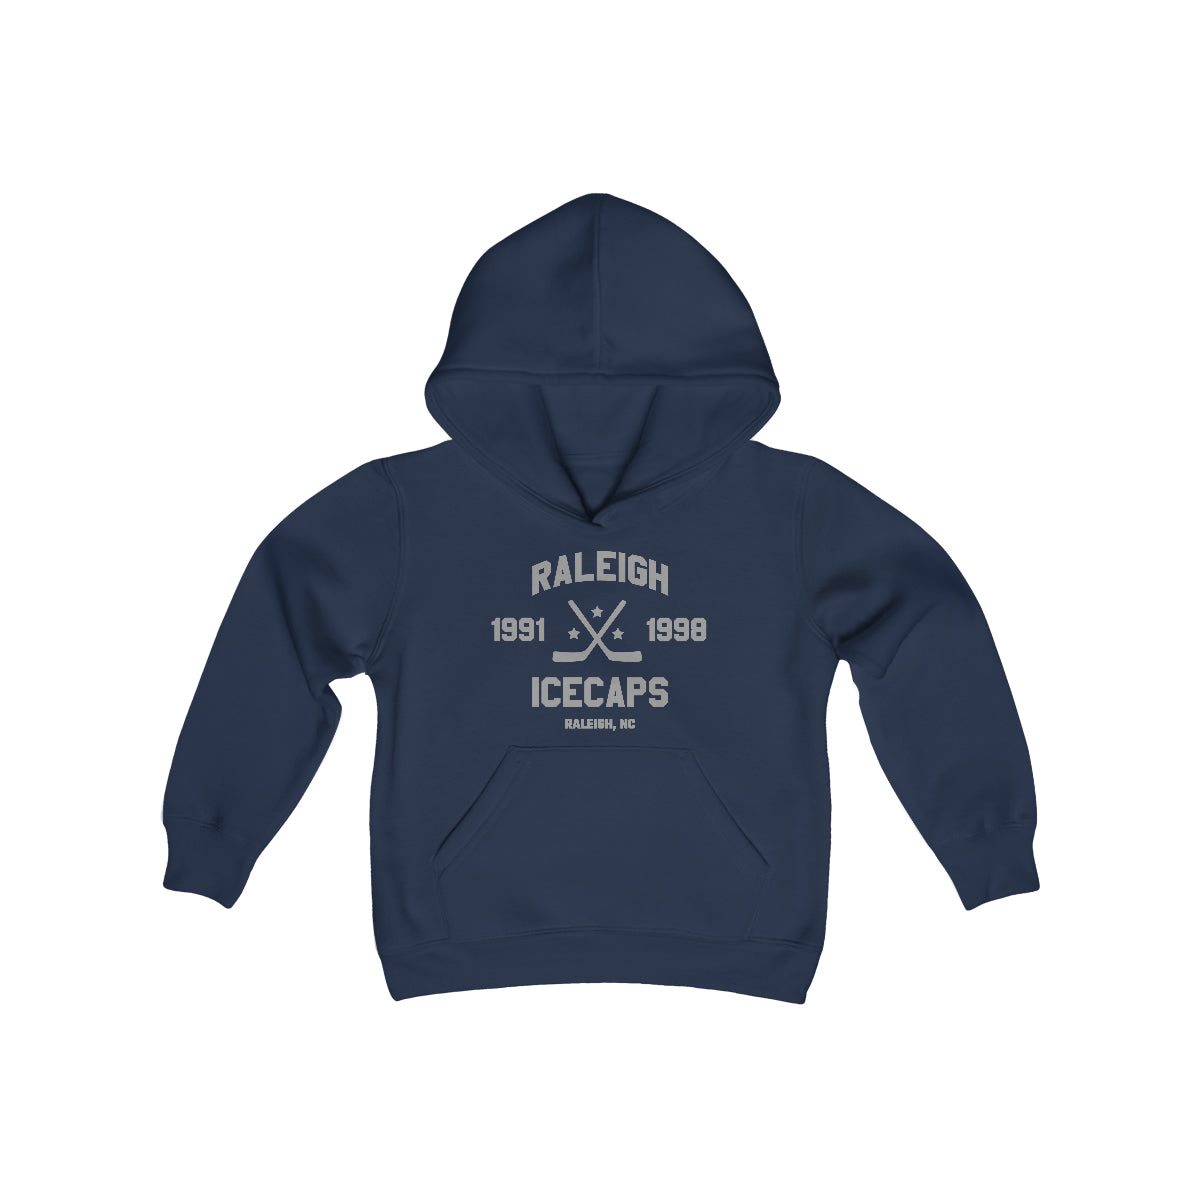 Raleigh IceCaps Hoodie (Youth)